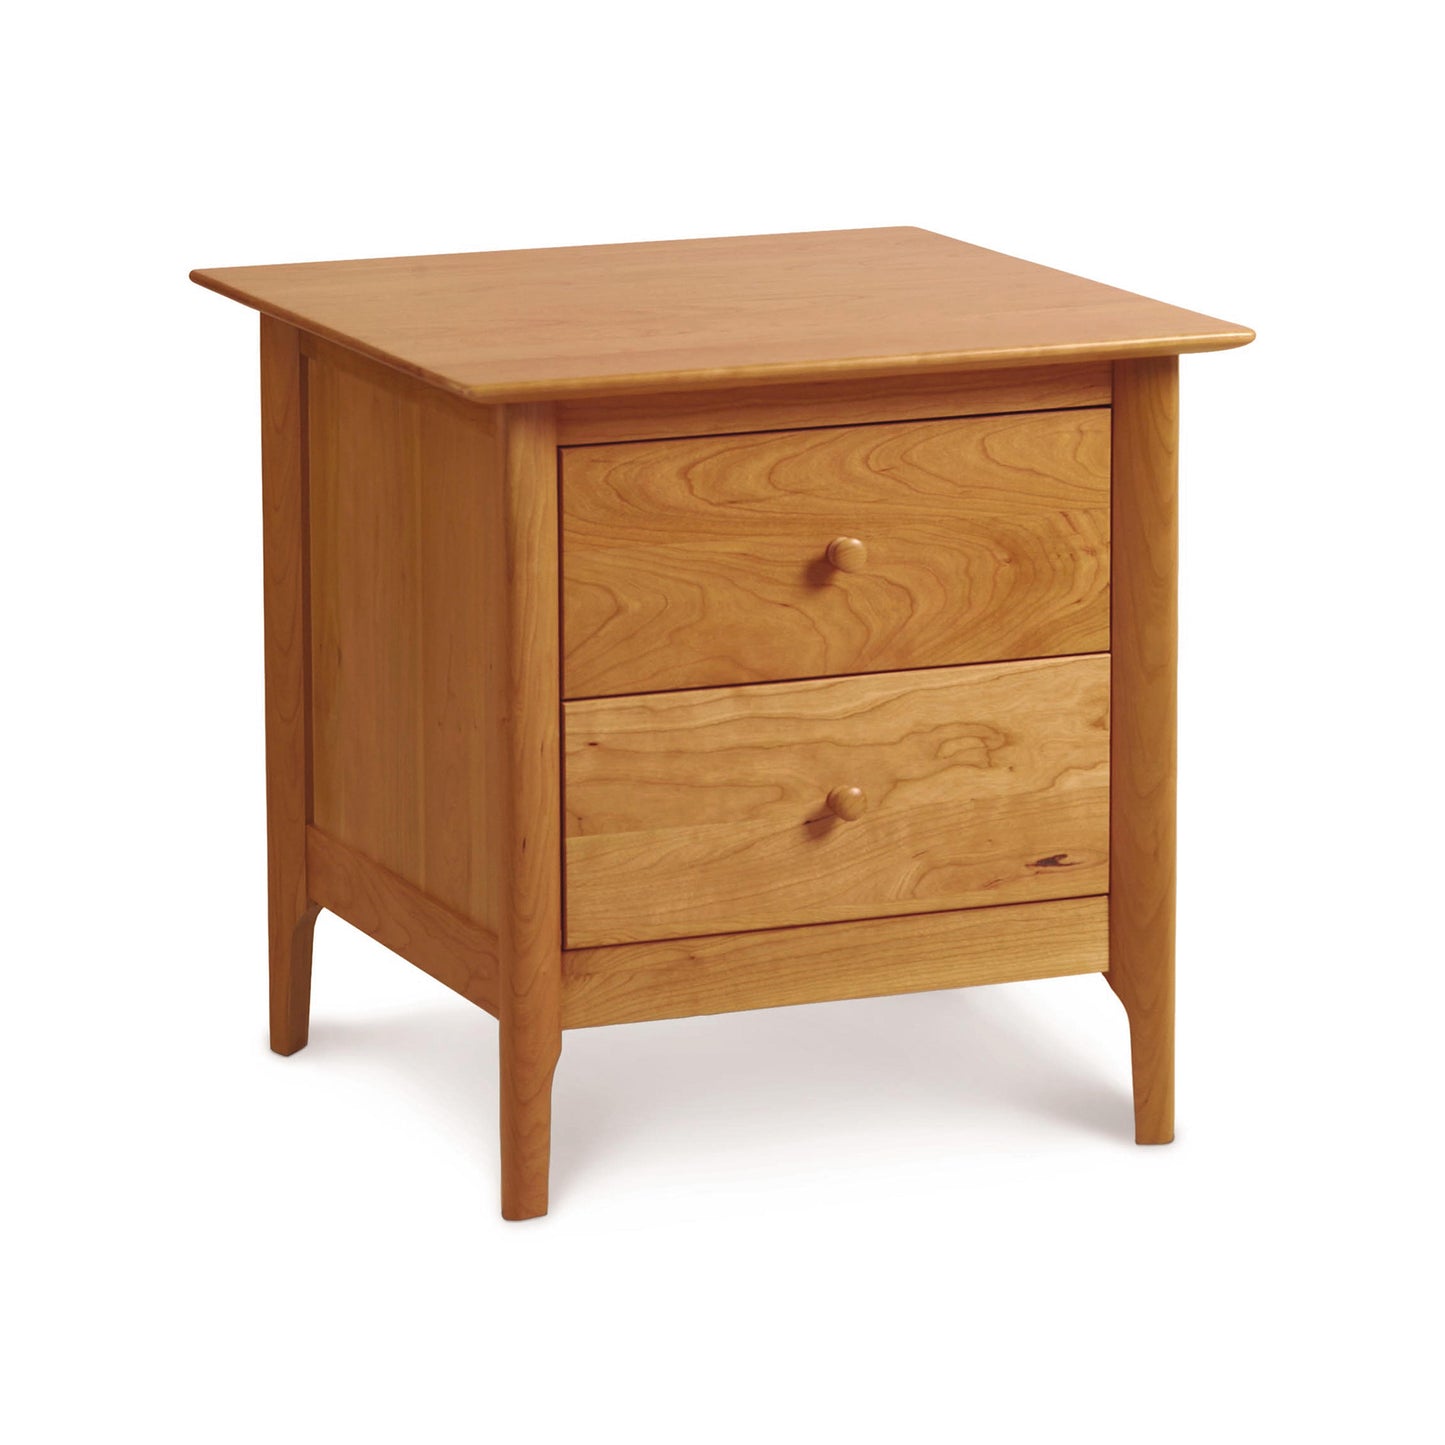 2. Copeland Furniture's Sarah 2-Drawer Nightstand, part of the Shaker-style Sarah Furniture Collection.